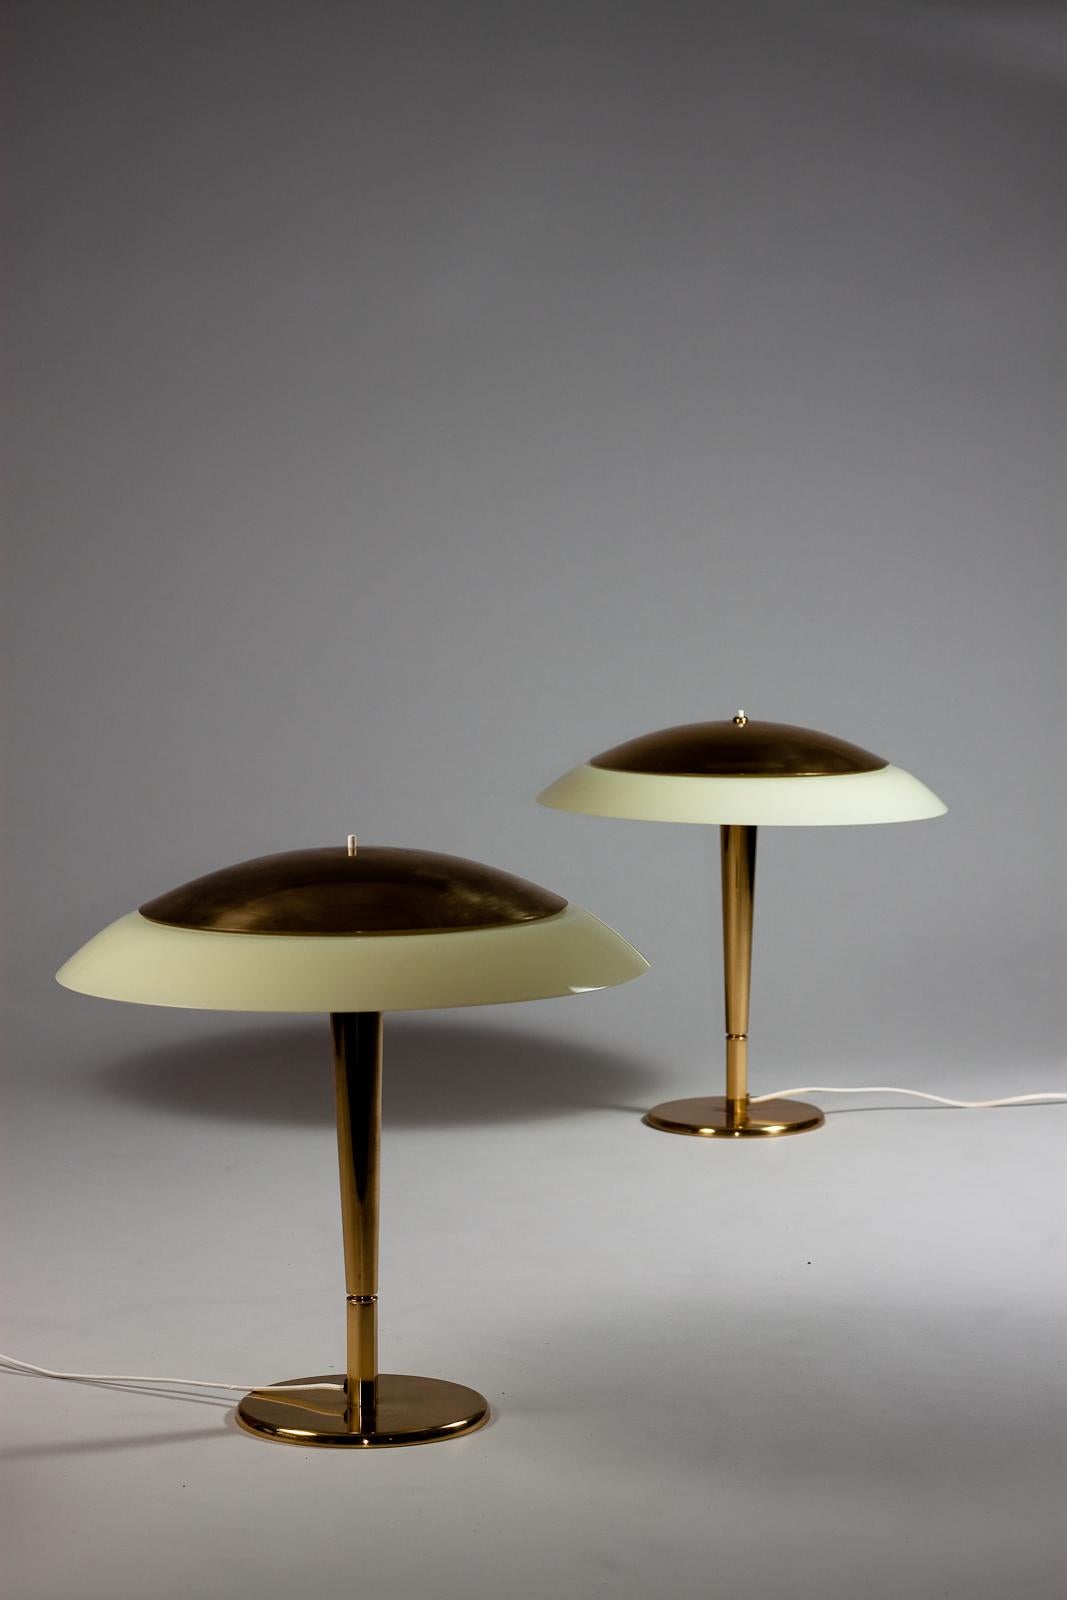 Introducing a pair of stunning brass desk lamps by Paavo Tynell, manufactured by Taito Oy in the 1940s and 1950s. These vintage lamps have a timeless design that still looks as sleek and modern today as it did over 70 years ago. The brass finish